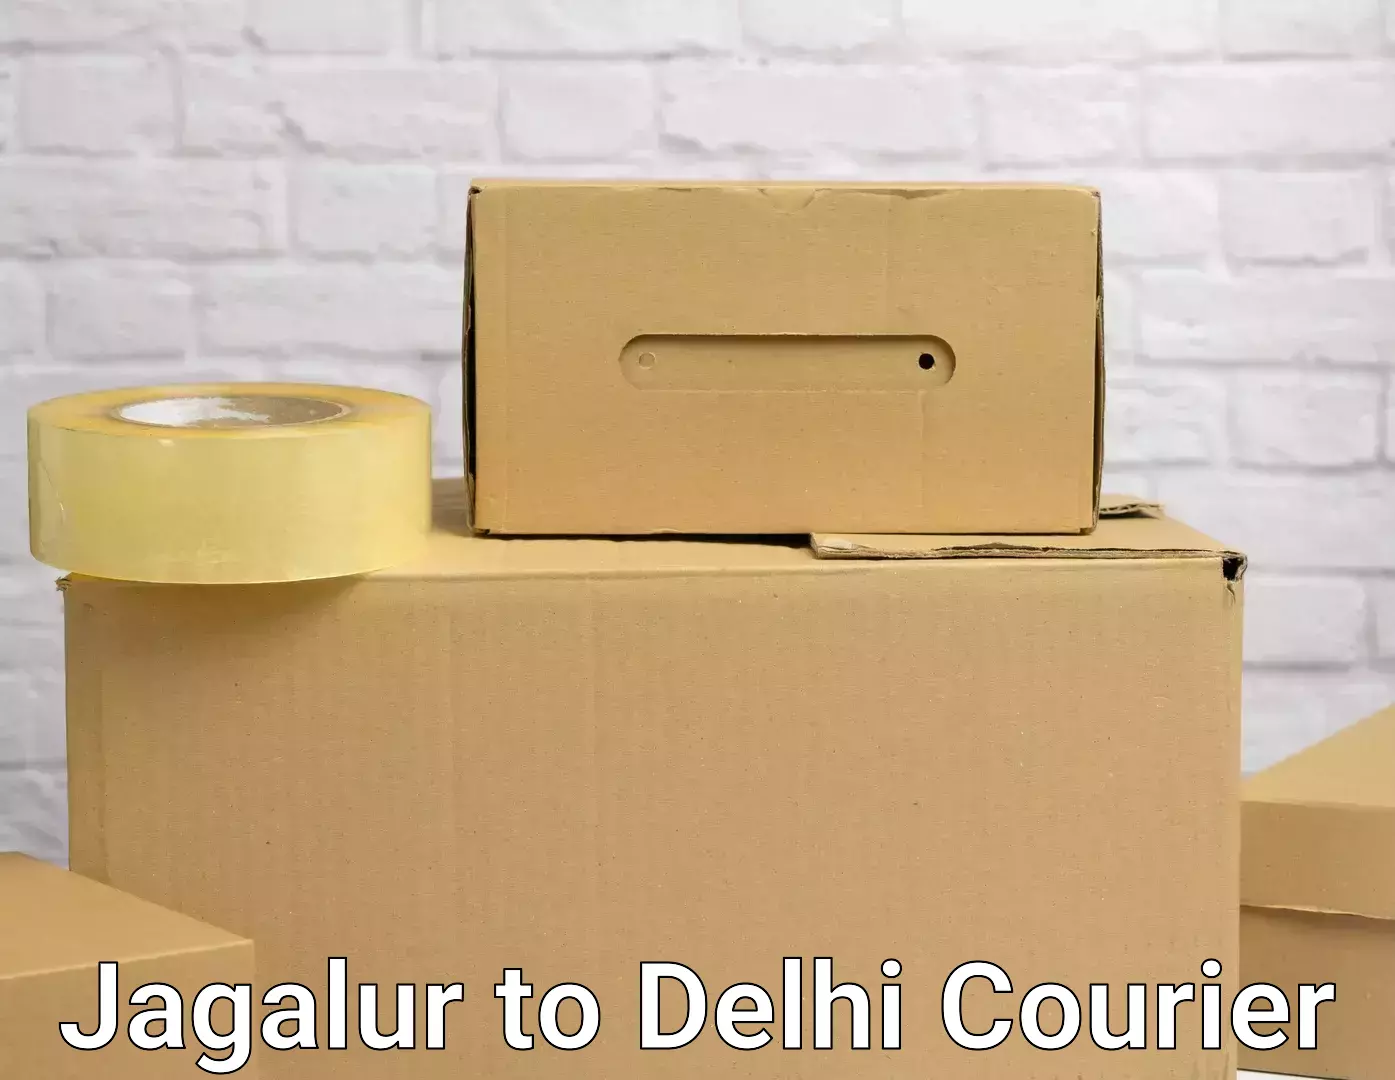 Quality relocation services Jagalur to Delhi